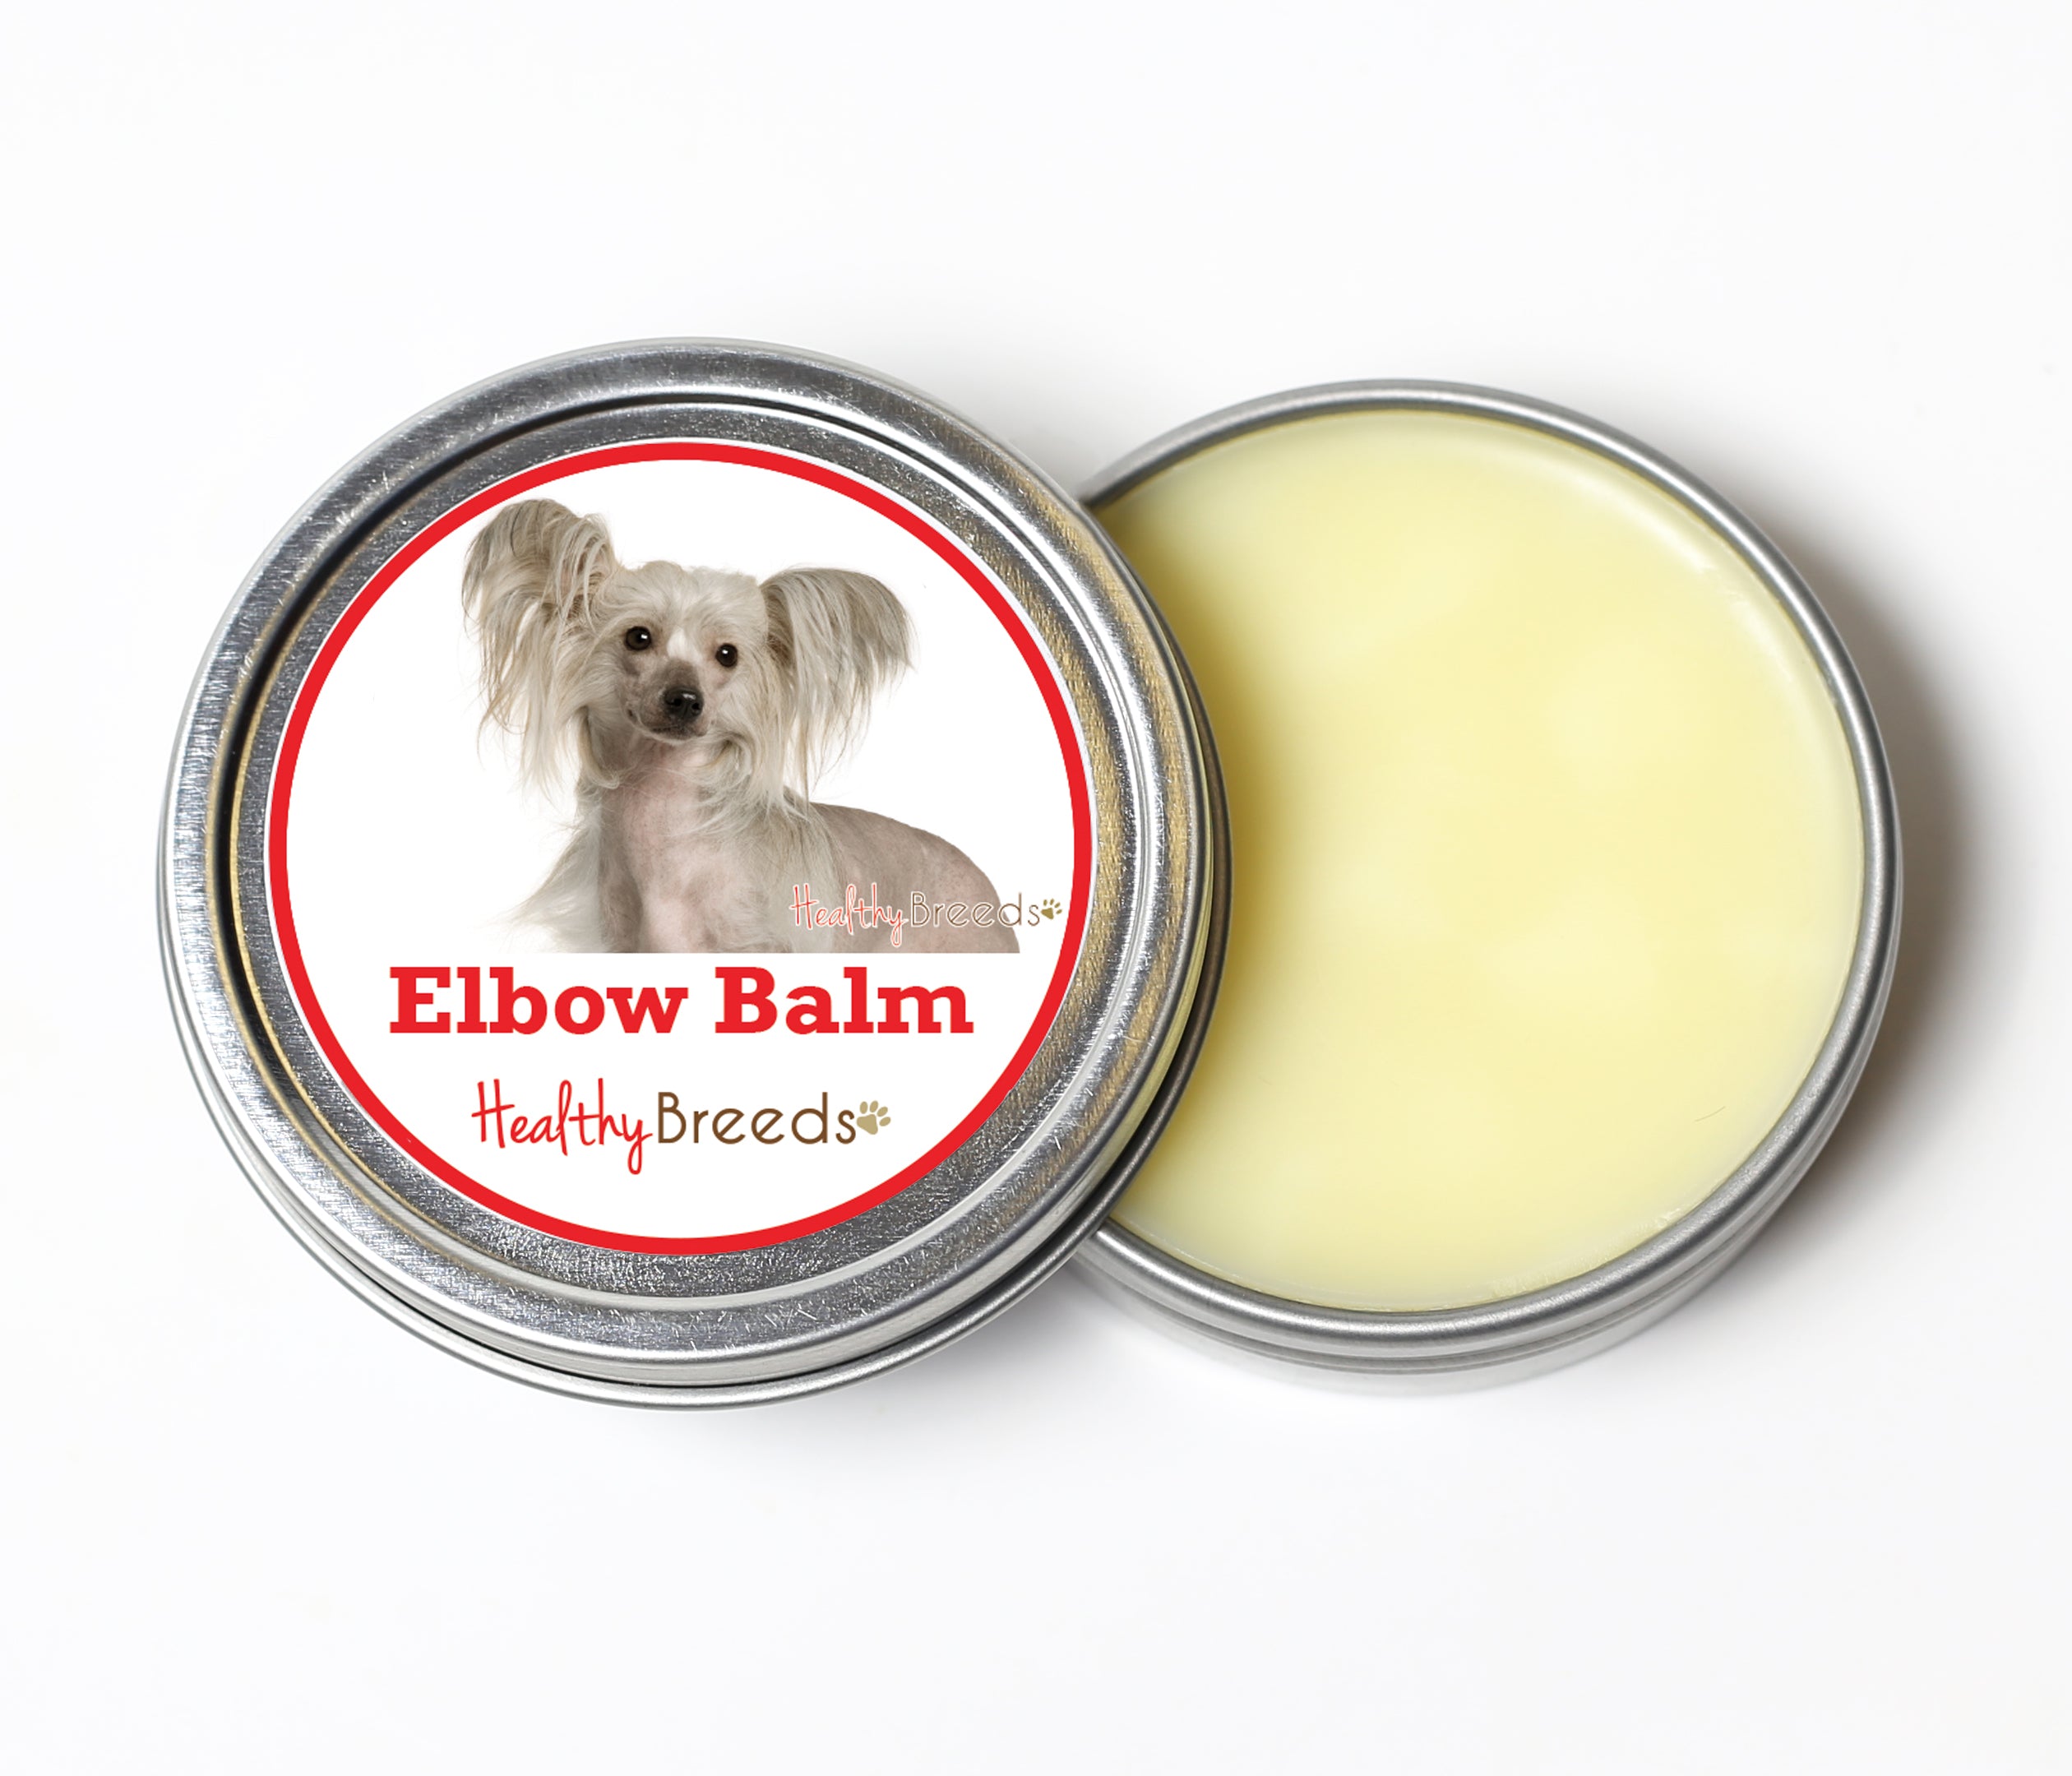 Chinese Crested Dog Elbow Balm 2 oz